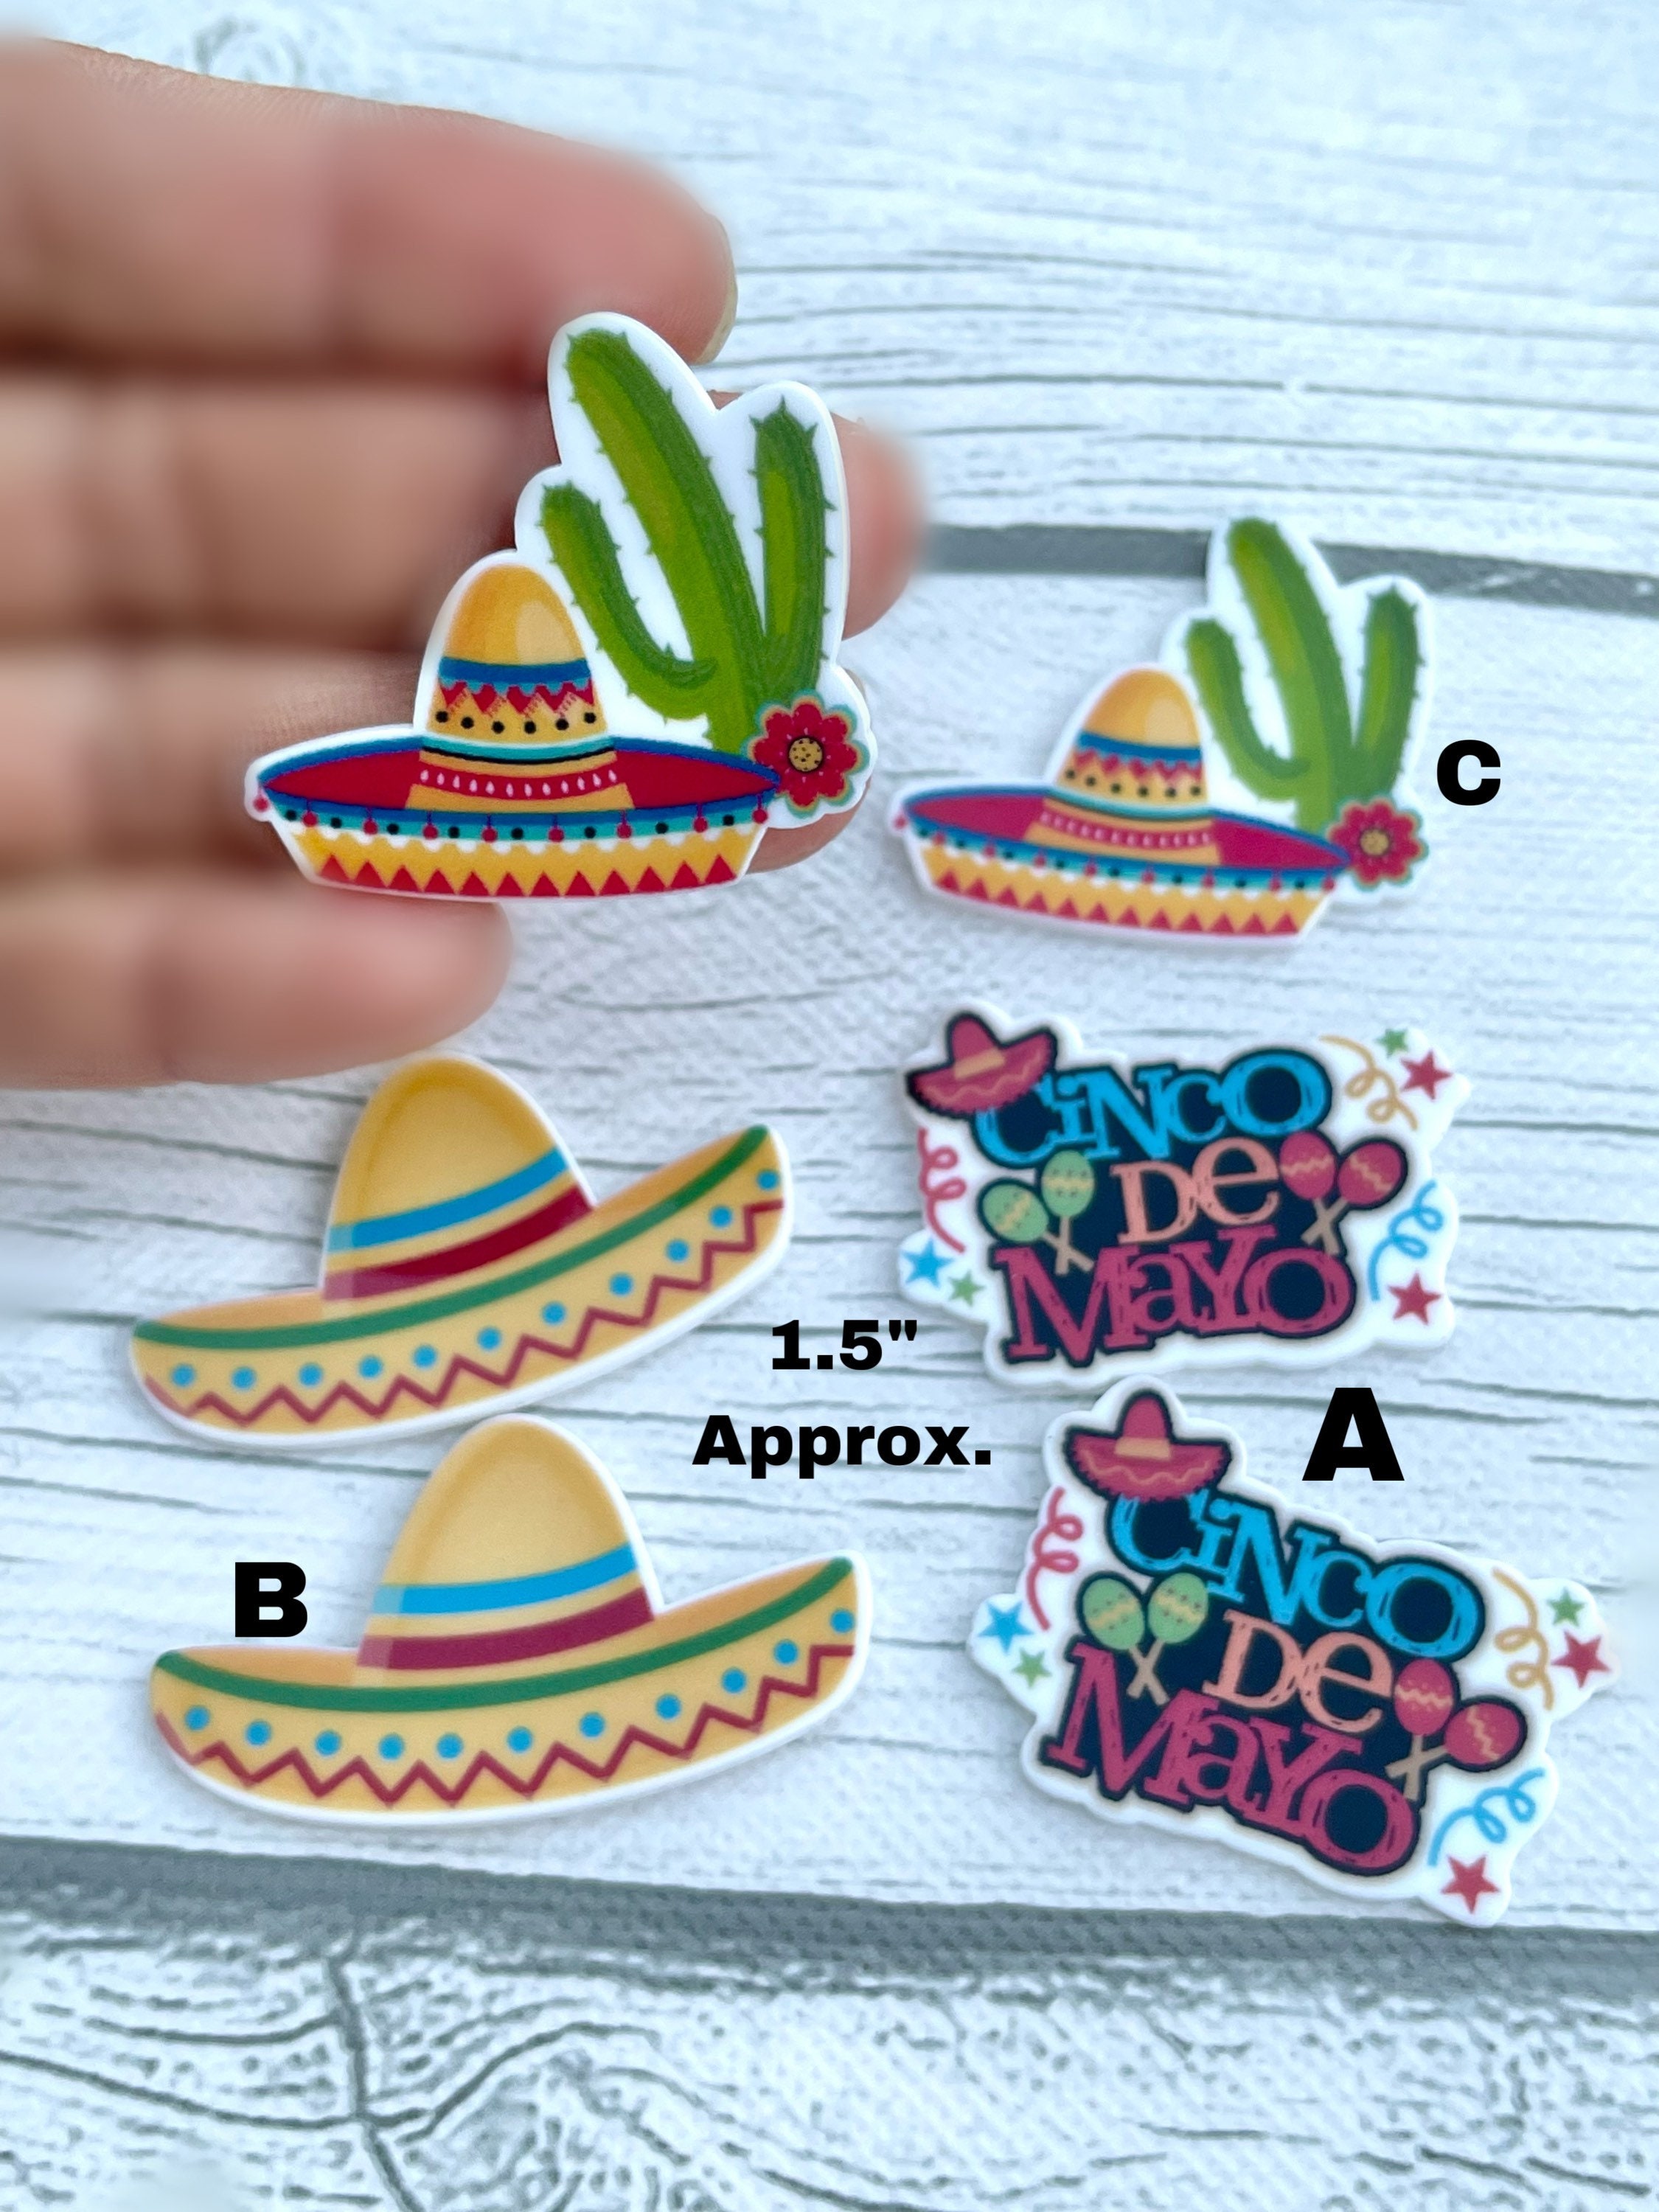 NVENF 20pcs Mexican Fiesta Charms Cinco de Mayo Charms for Jewelry Making, Colorful Enamel Sombrero Cactus Chili Pinata Pendant Charms for Bracelet